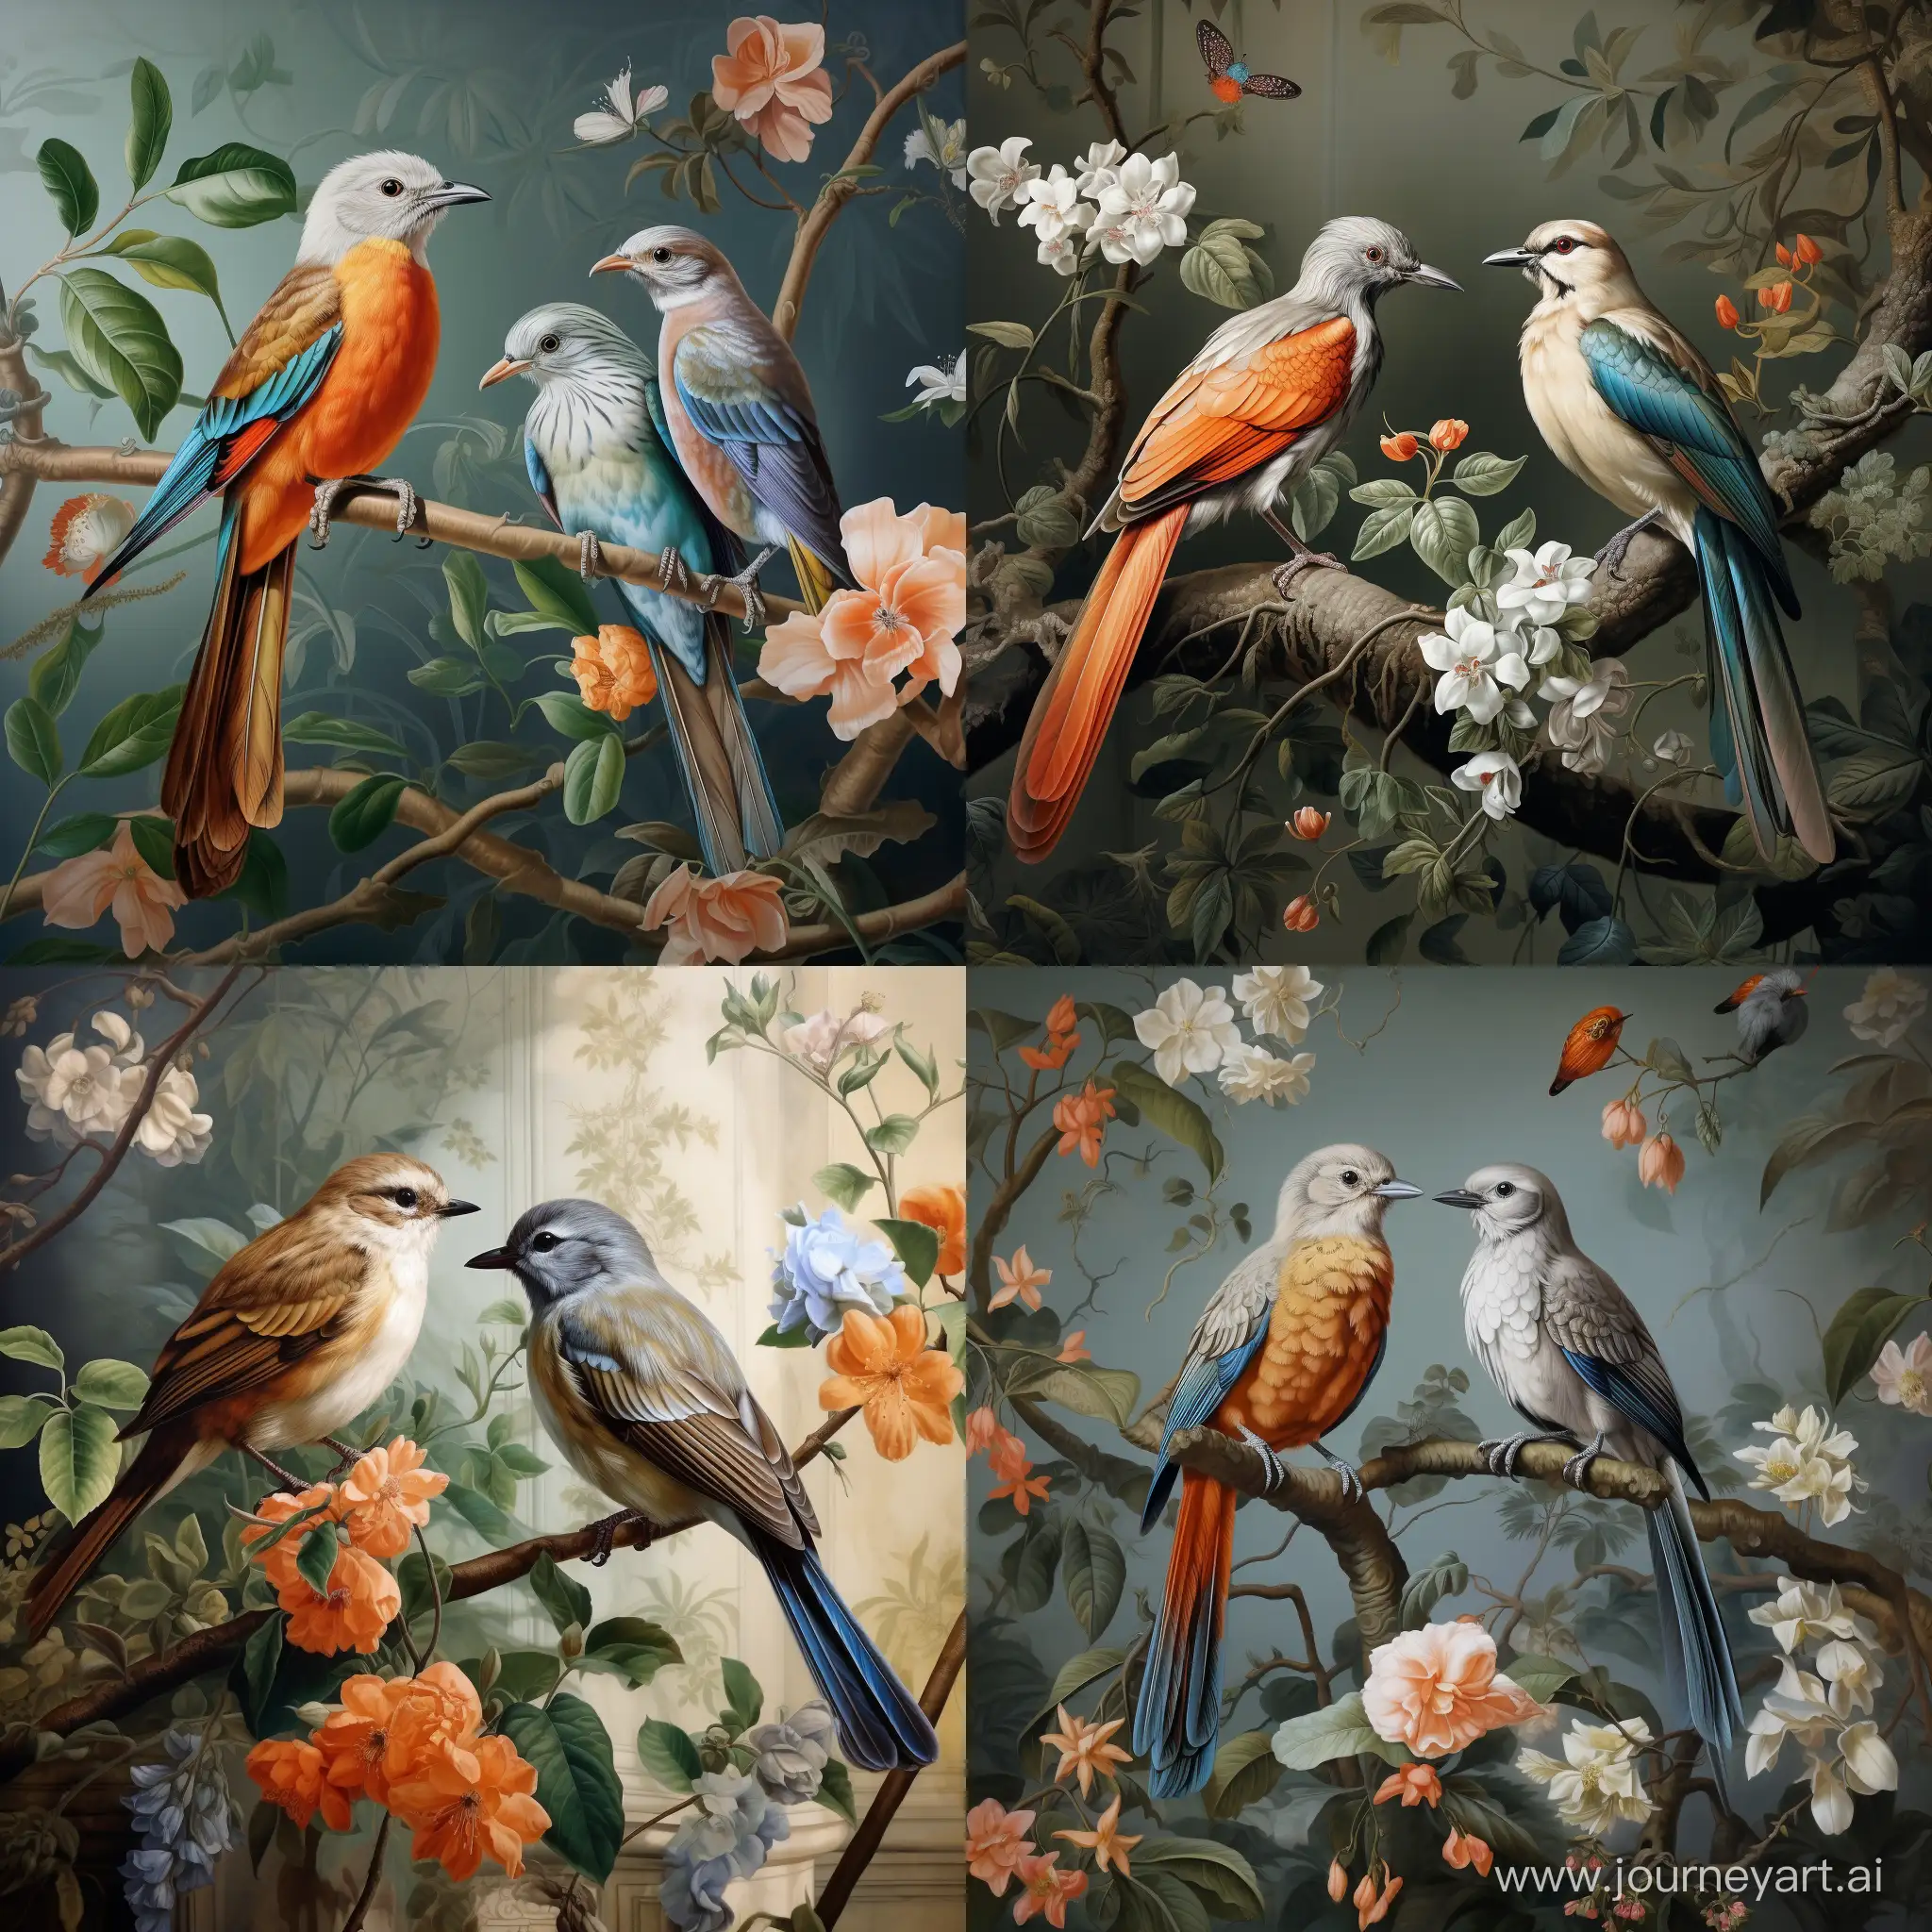 2 birds sitting on a branch with a flower, green leaves and flowers, in the style of meticulous realism, light brown and azure, influenced by ancient chinese art, spectacular backdrops, light silver and orange, detailed hunting scenes, harmony with nature